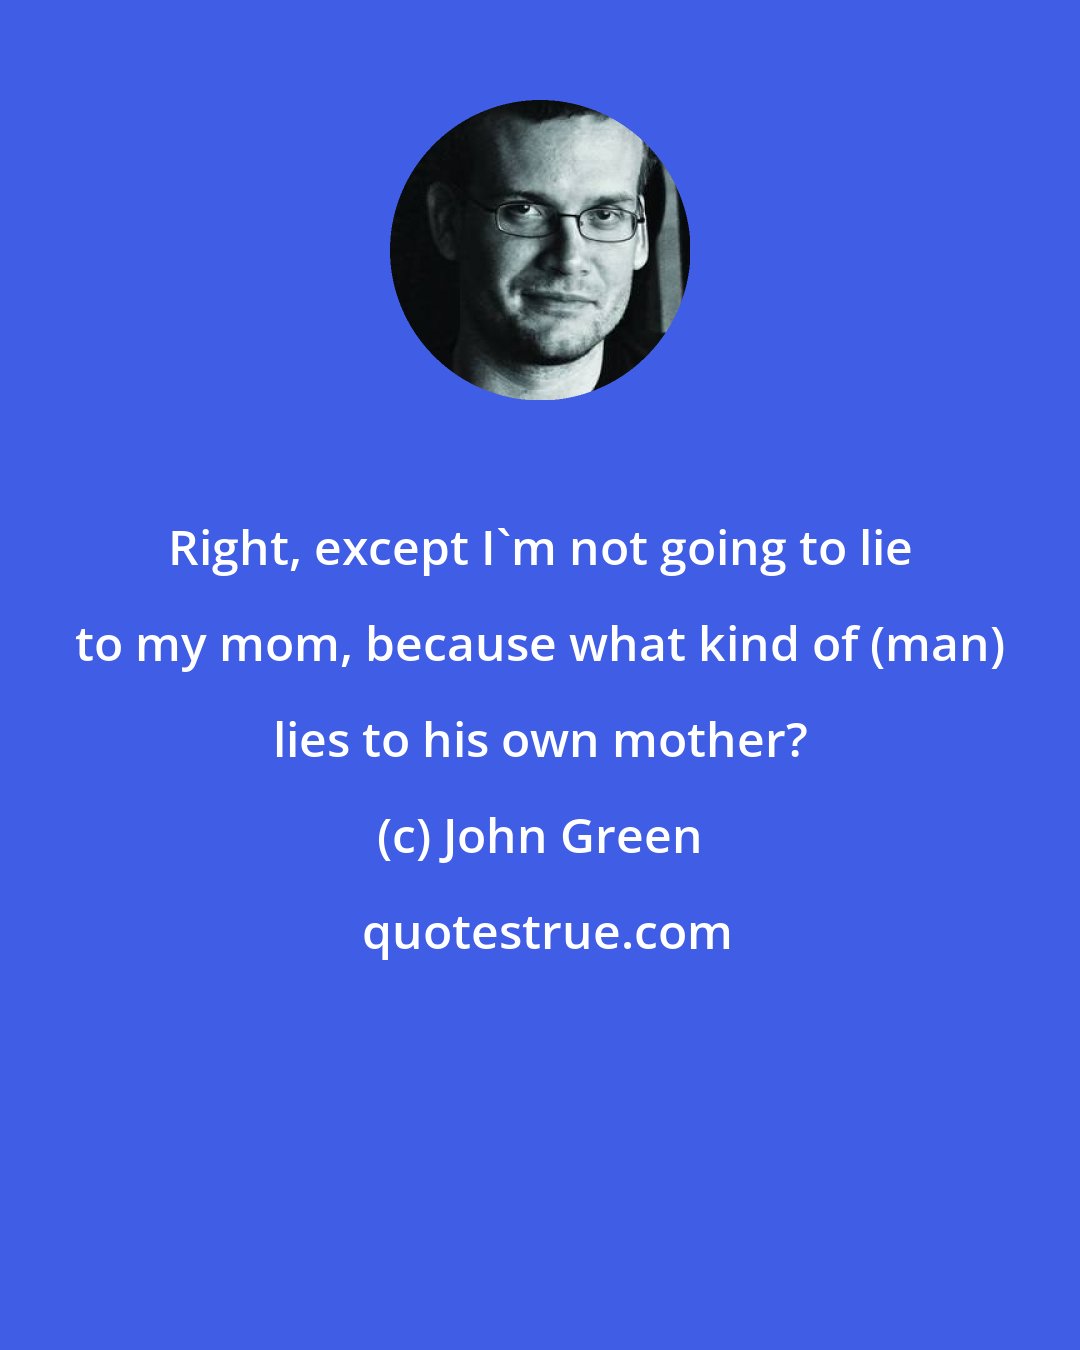 John Green: Right, except I'm not going to lie to my mom, because what kind of (man) lies to his own mother?